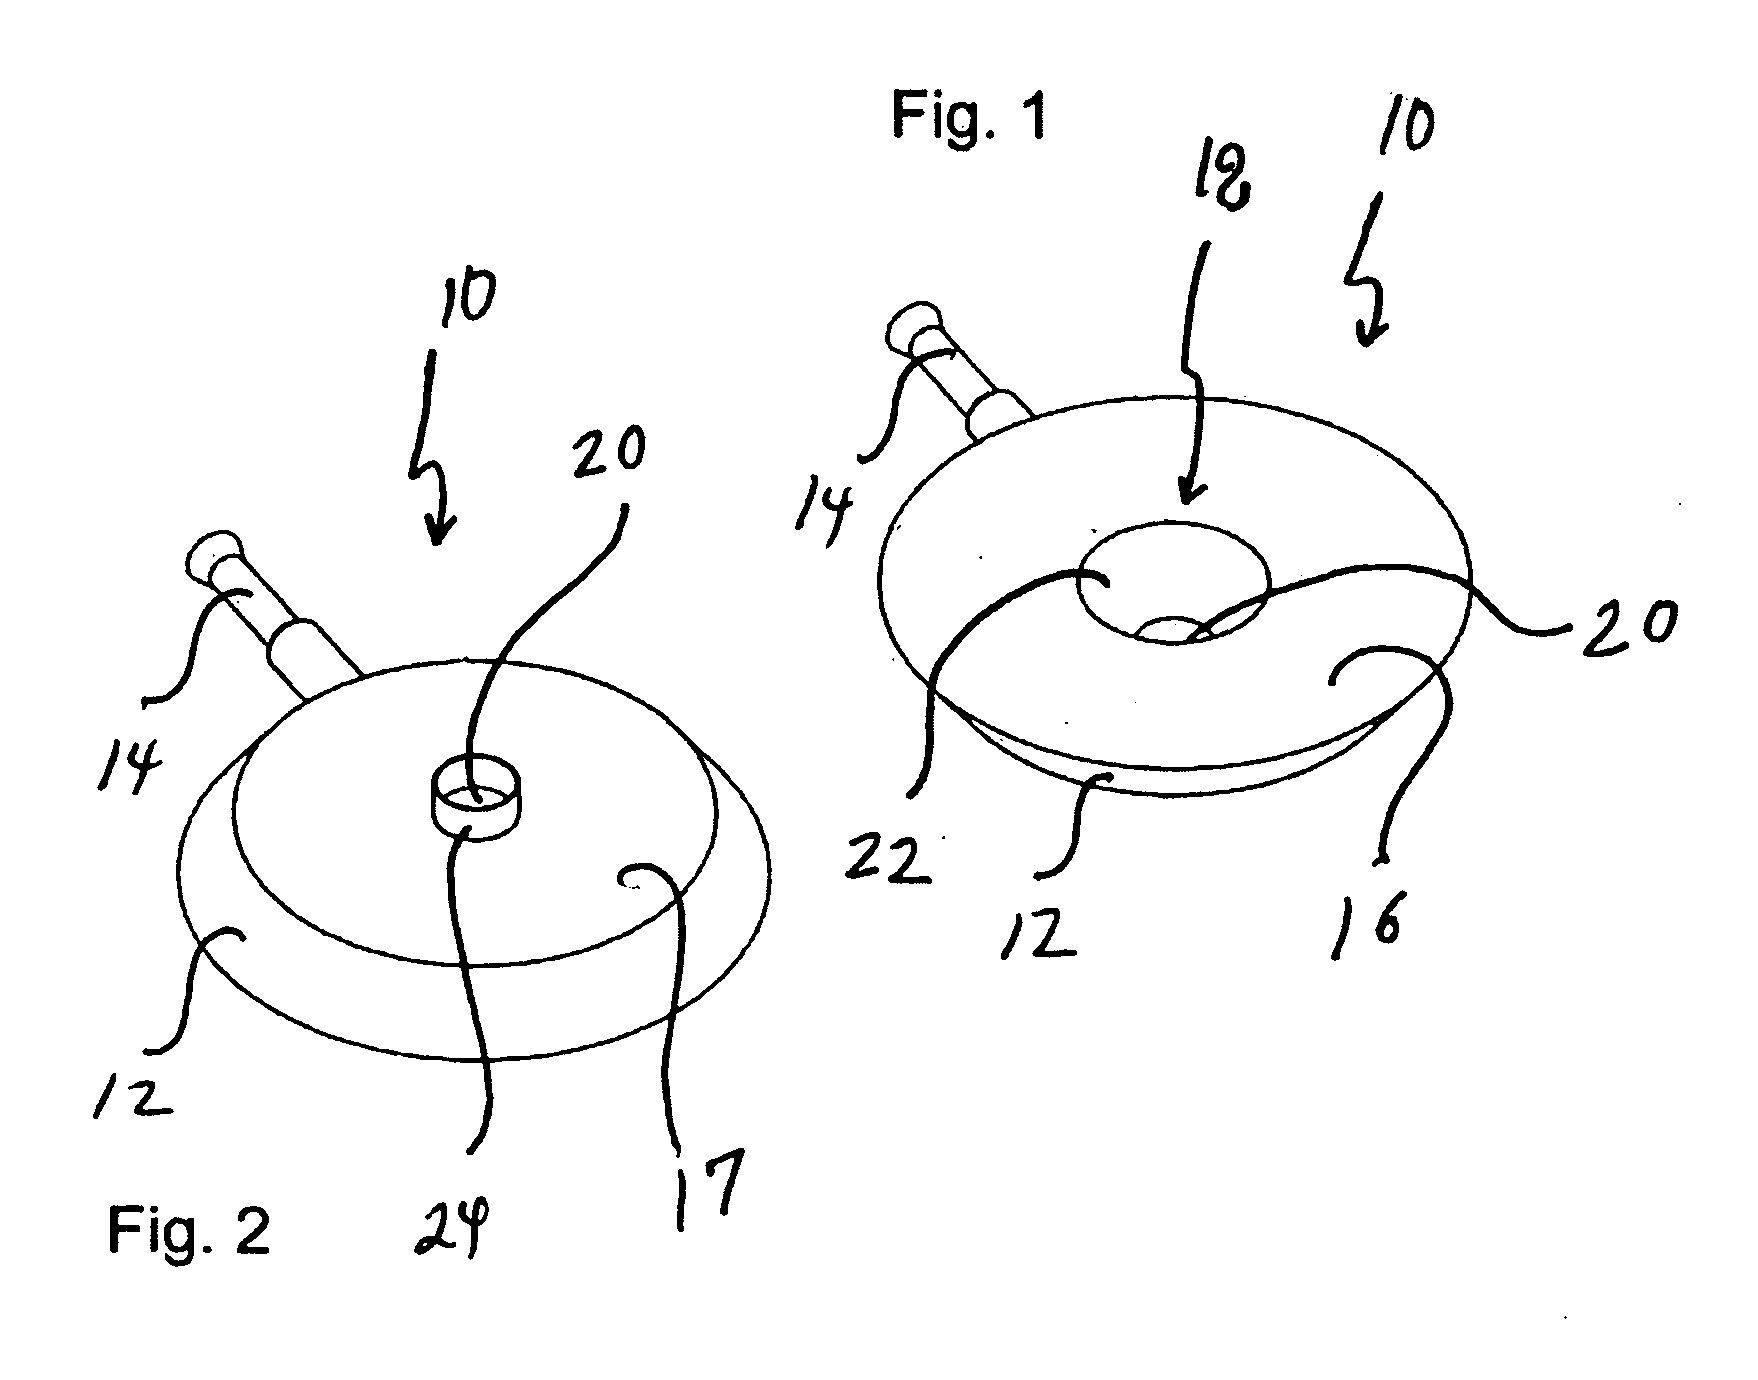 Infrared burner with exhaust gas flue